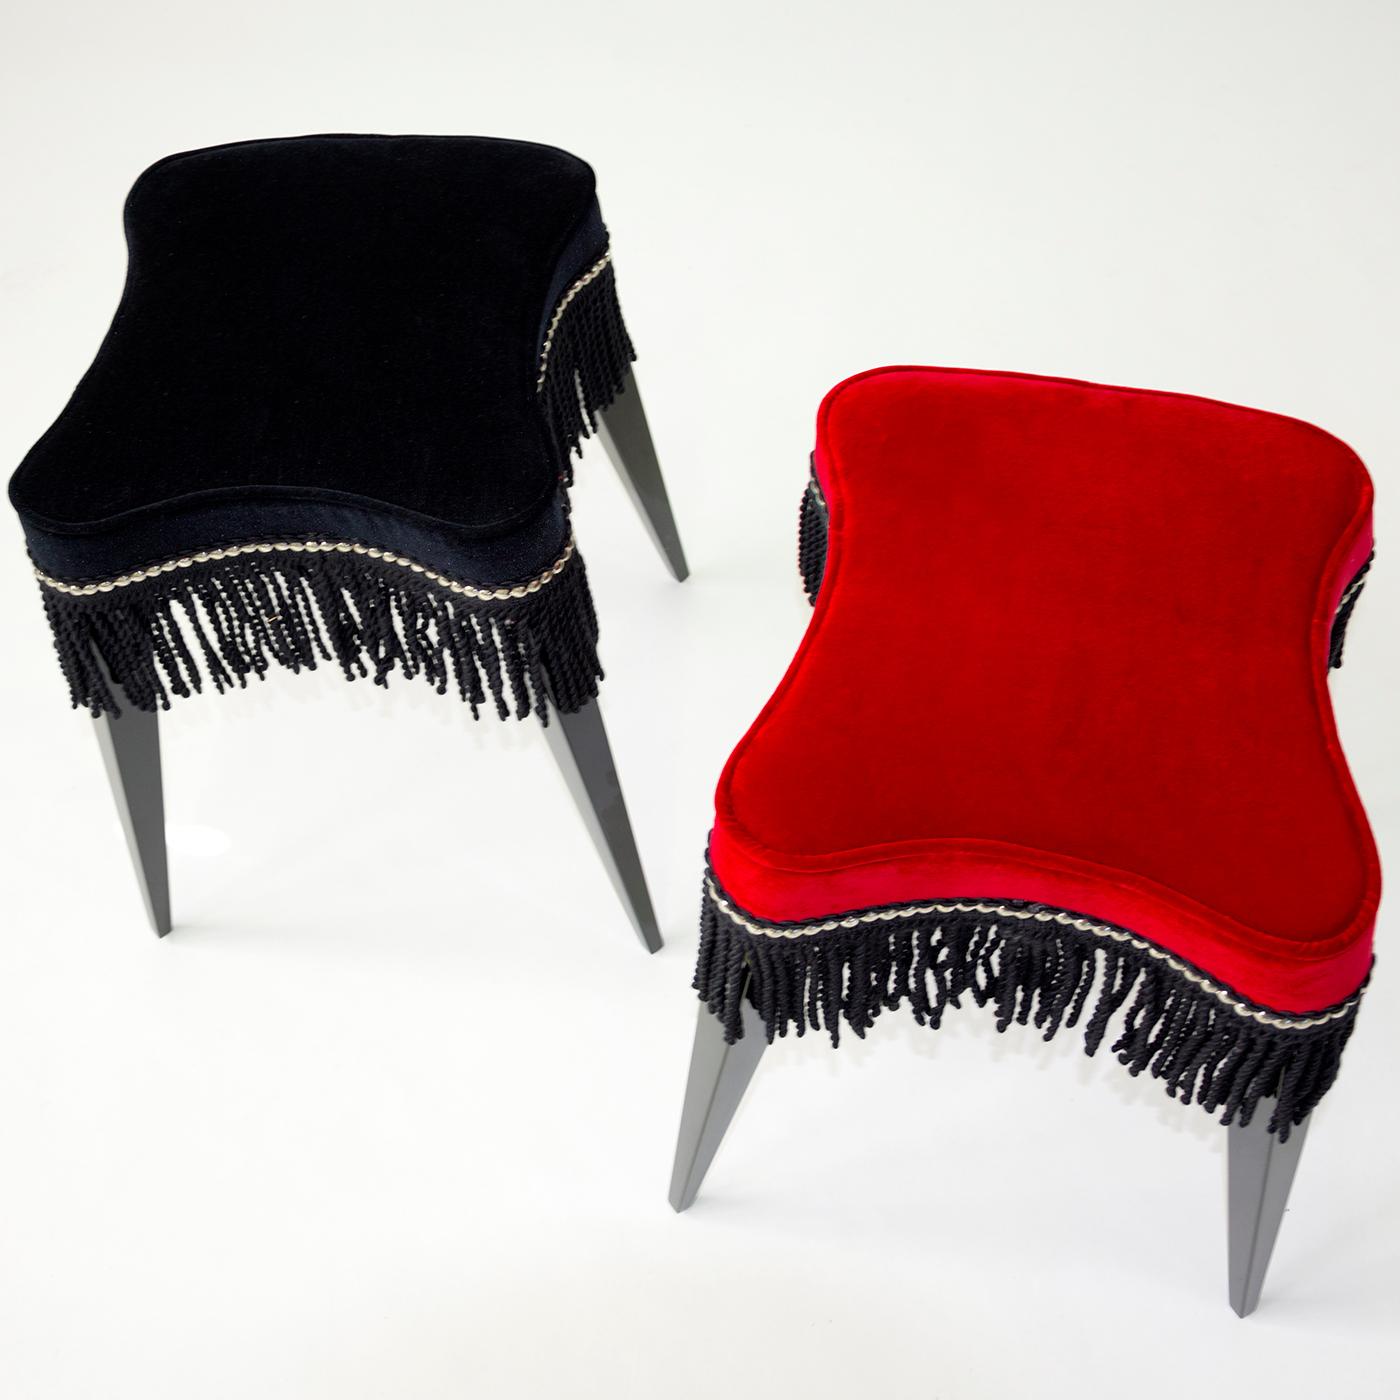 Lovely and eclectic stool with black lacquered wooden legs. The seat is upholstered with red velvet embellished with visible studs and black fringes. The ironic and original design makes this piece of furniture so versatile that it can be combined